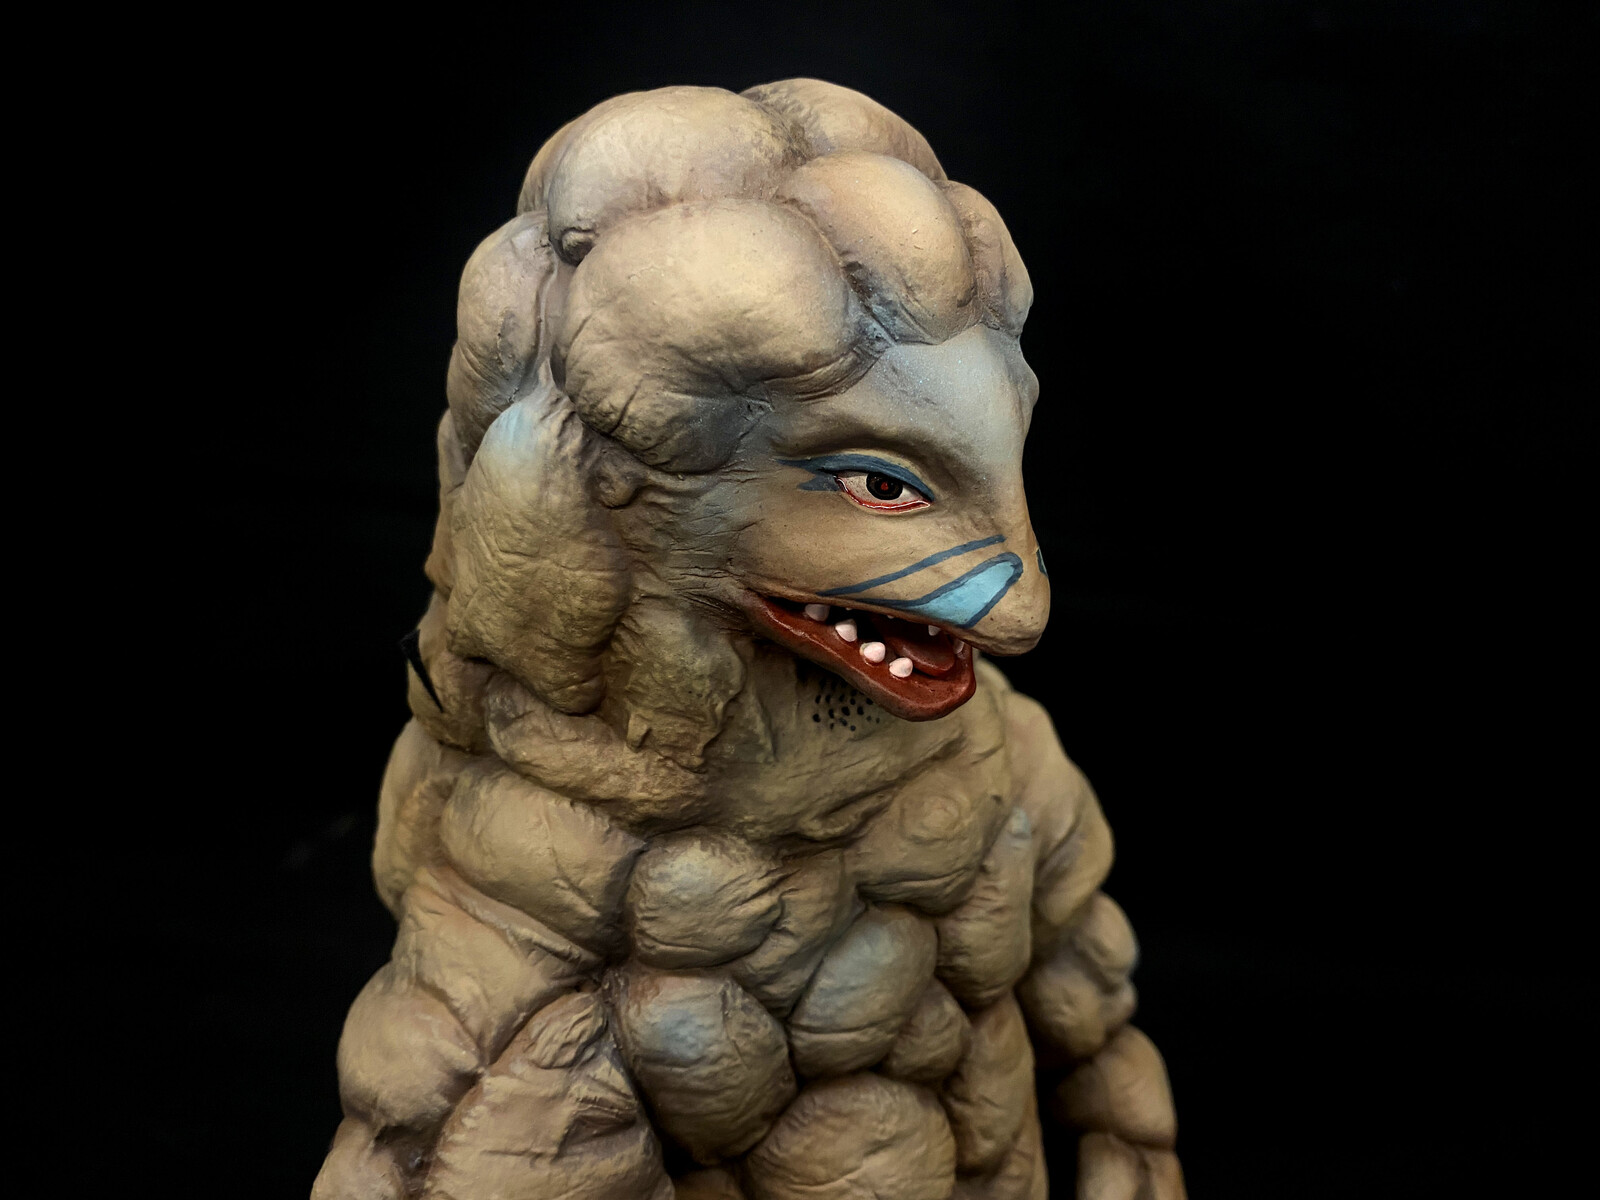 Ultra Kaiju Shugaron Art statue  (シュガロン音波怪獣) 完成品
Portfolio &amp; Store: https://www.solidart.club/
This piece is hand-painted and finished, 
with its own unique quality and detail 
that is the trademark of a handcrafted 
Art Of Toys custom product.